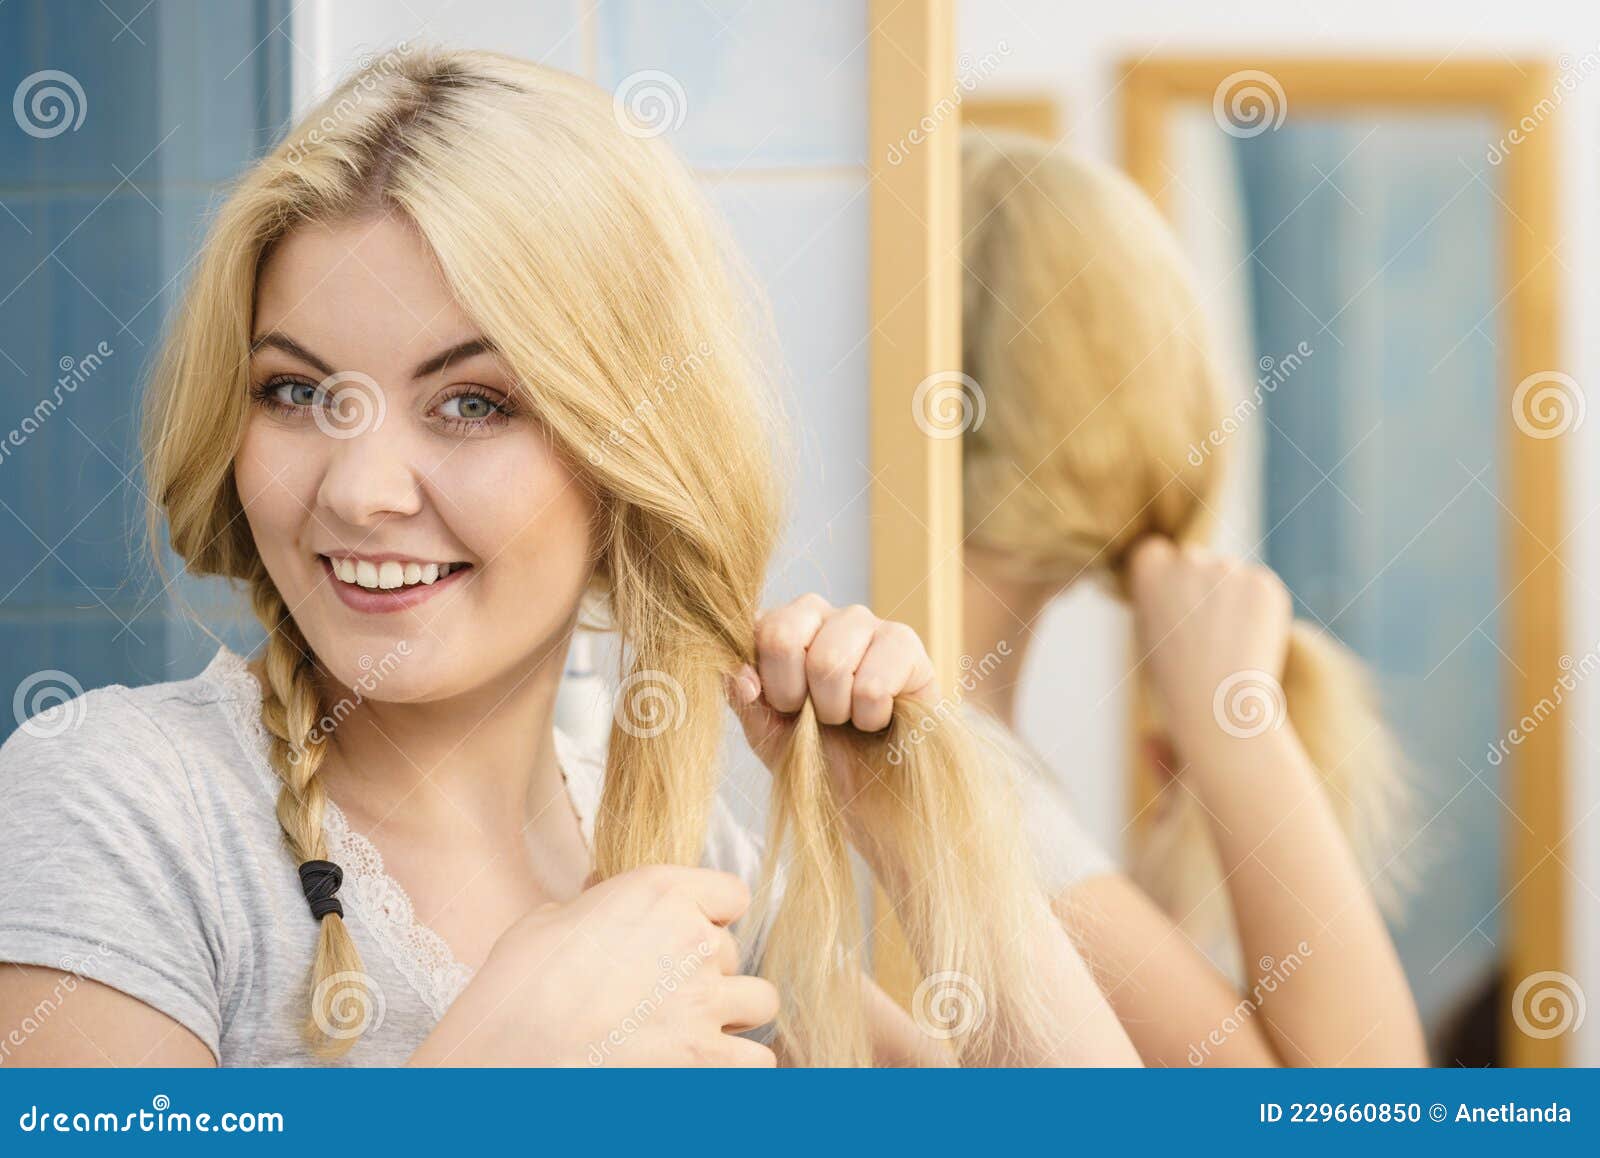 3. How to Braid Blonde Hair: Step-by-Step Guide - wide 3